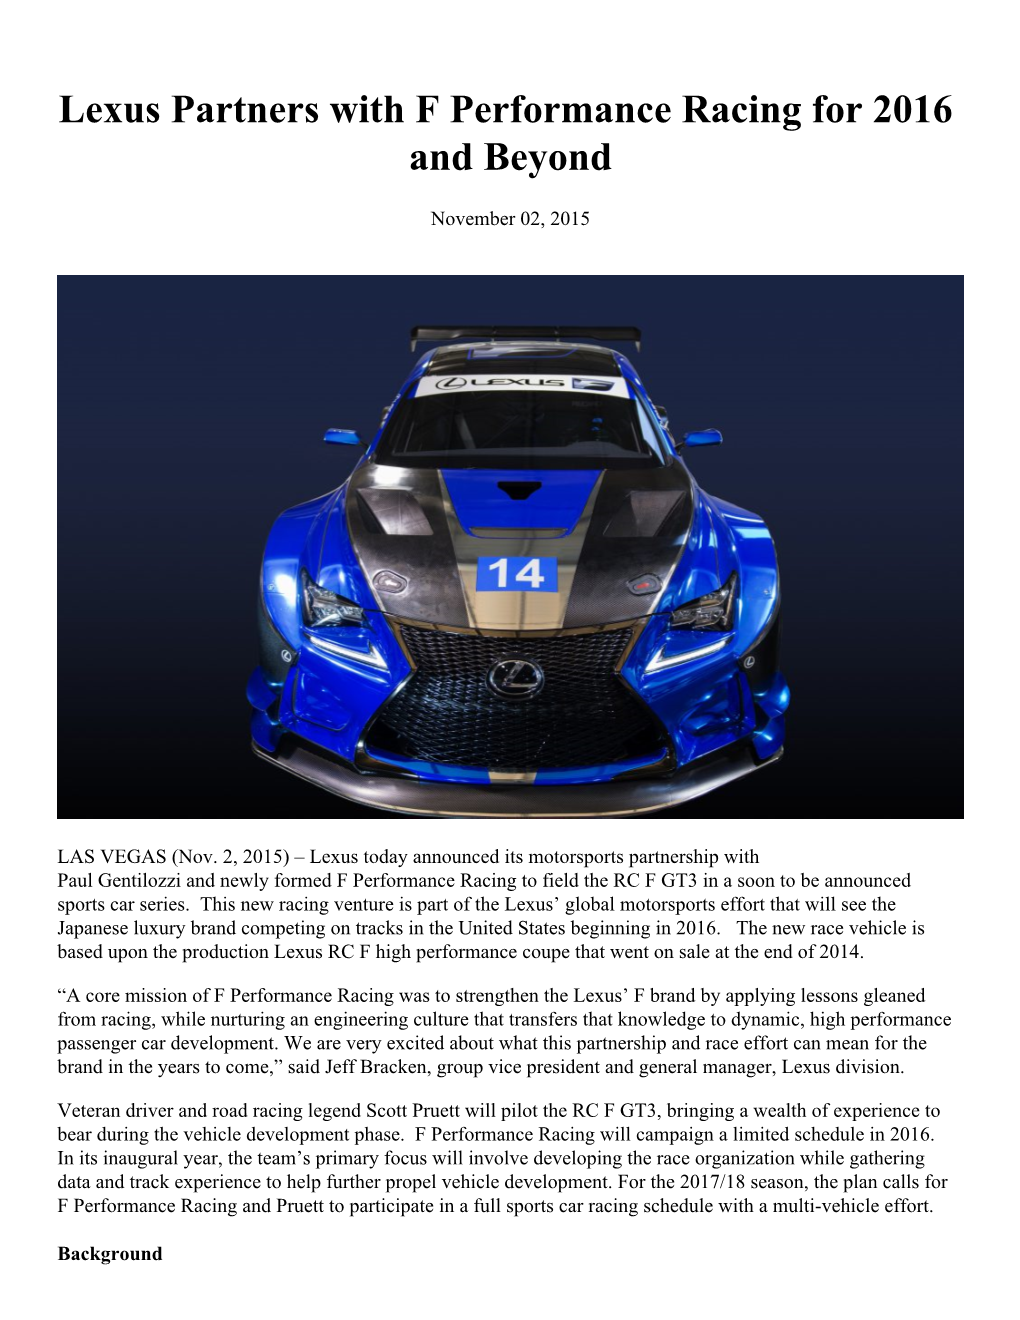 Lexus Partners with F Performance Racing for 2016 and Beyond